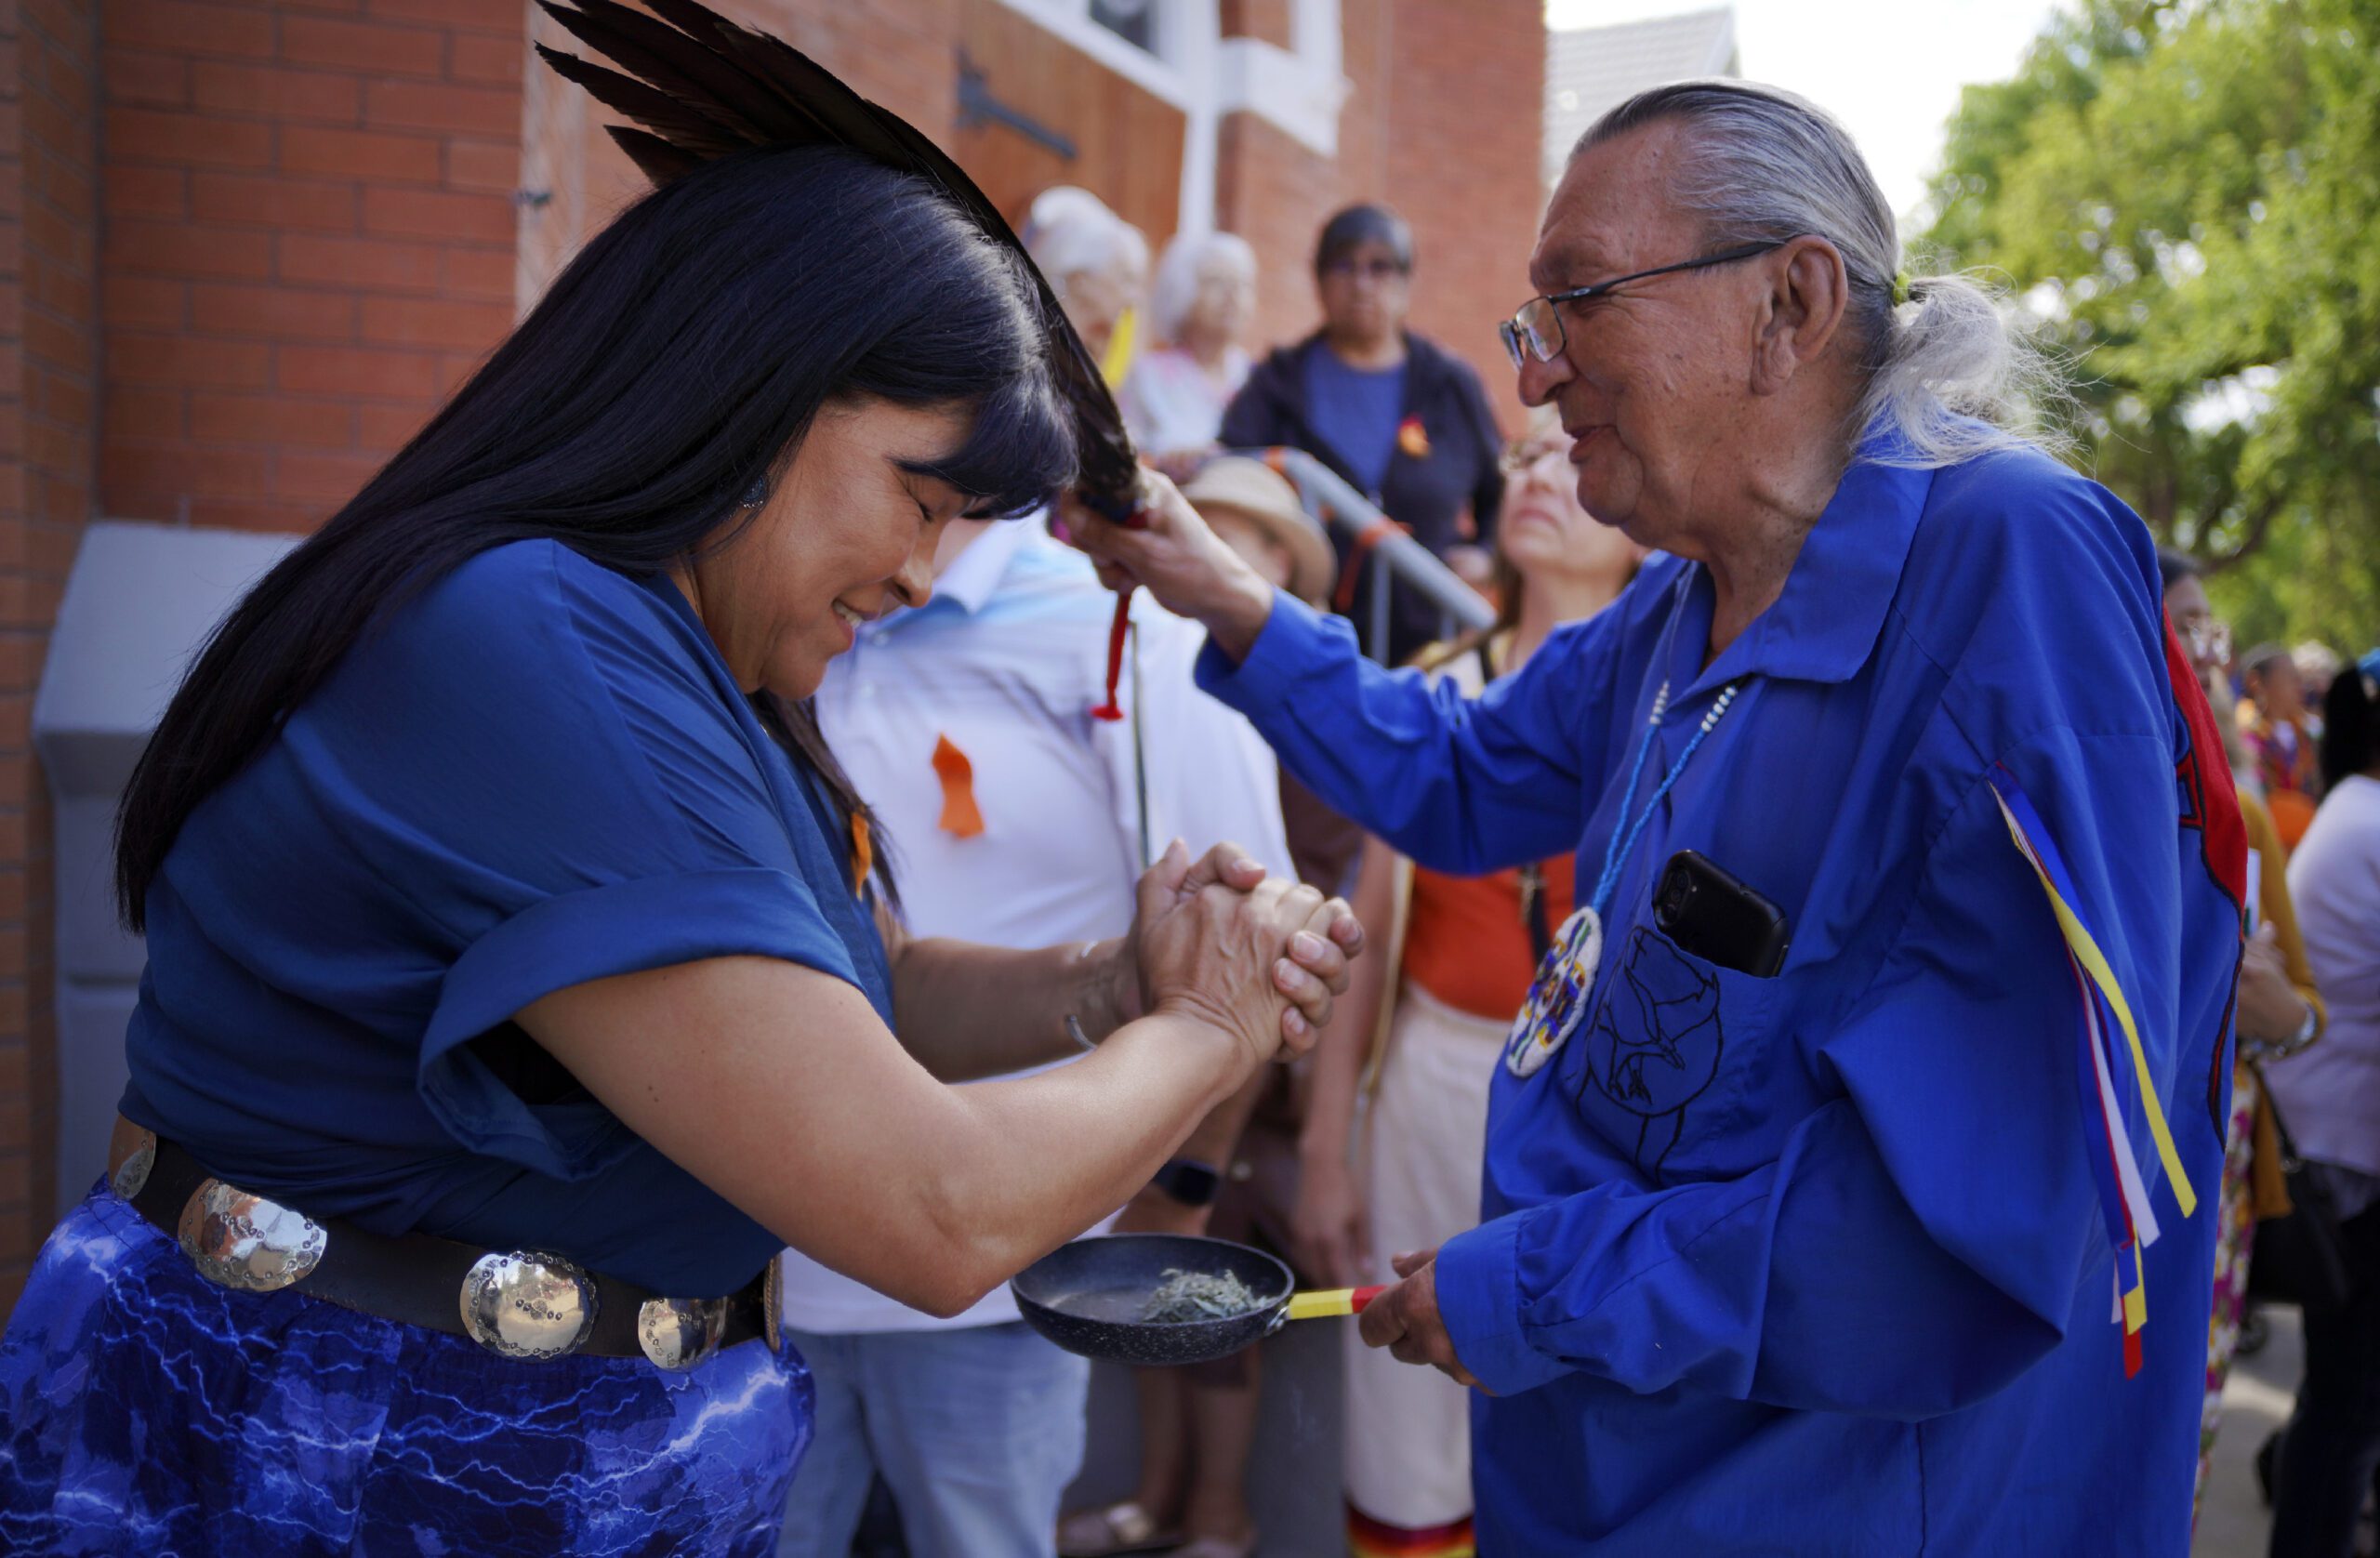 Marlene Poitras participates in a smudging, a ceremonial burning of scented plants for purification and blessing, with church elder Fernie Marty outside of Sacred Heart Church of the First Peoples on Sunday, July 17, 2022, in Edmonton, Alberta. Marty is a survivor of a day school for Indigenous children, which had culturally repressive policies similar to that of residential schools. He has continued practicing his Catholic faith in conjunction with Indigenous ceremonies. (AP Photo/Jessie Wardarski)